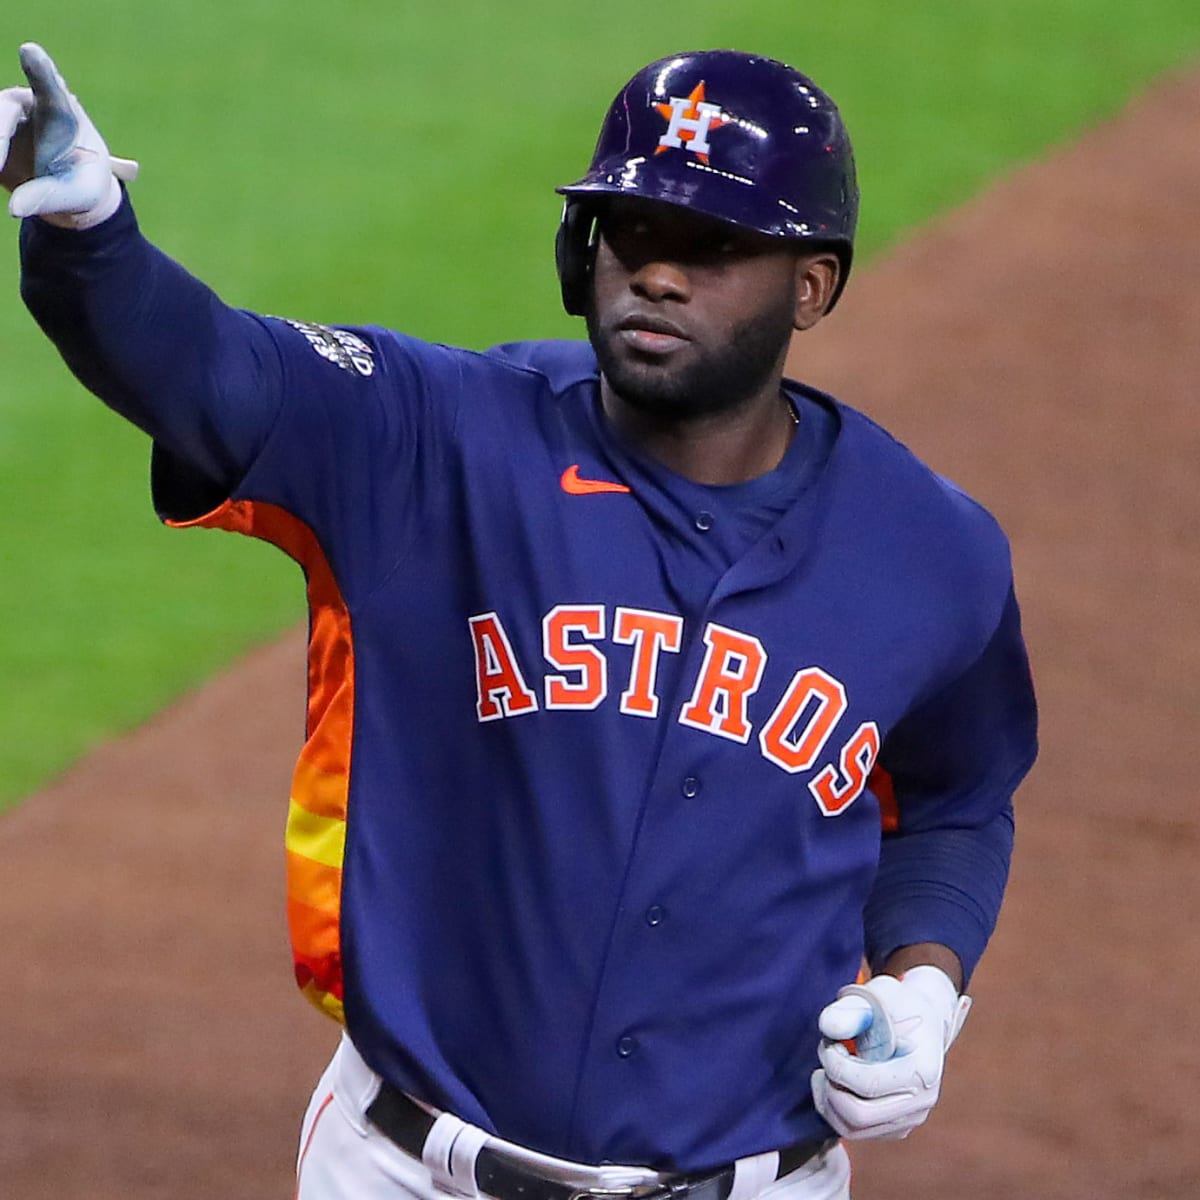 Houston Astros: Why the asterisk argument for titles remains